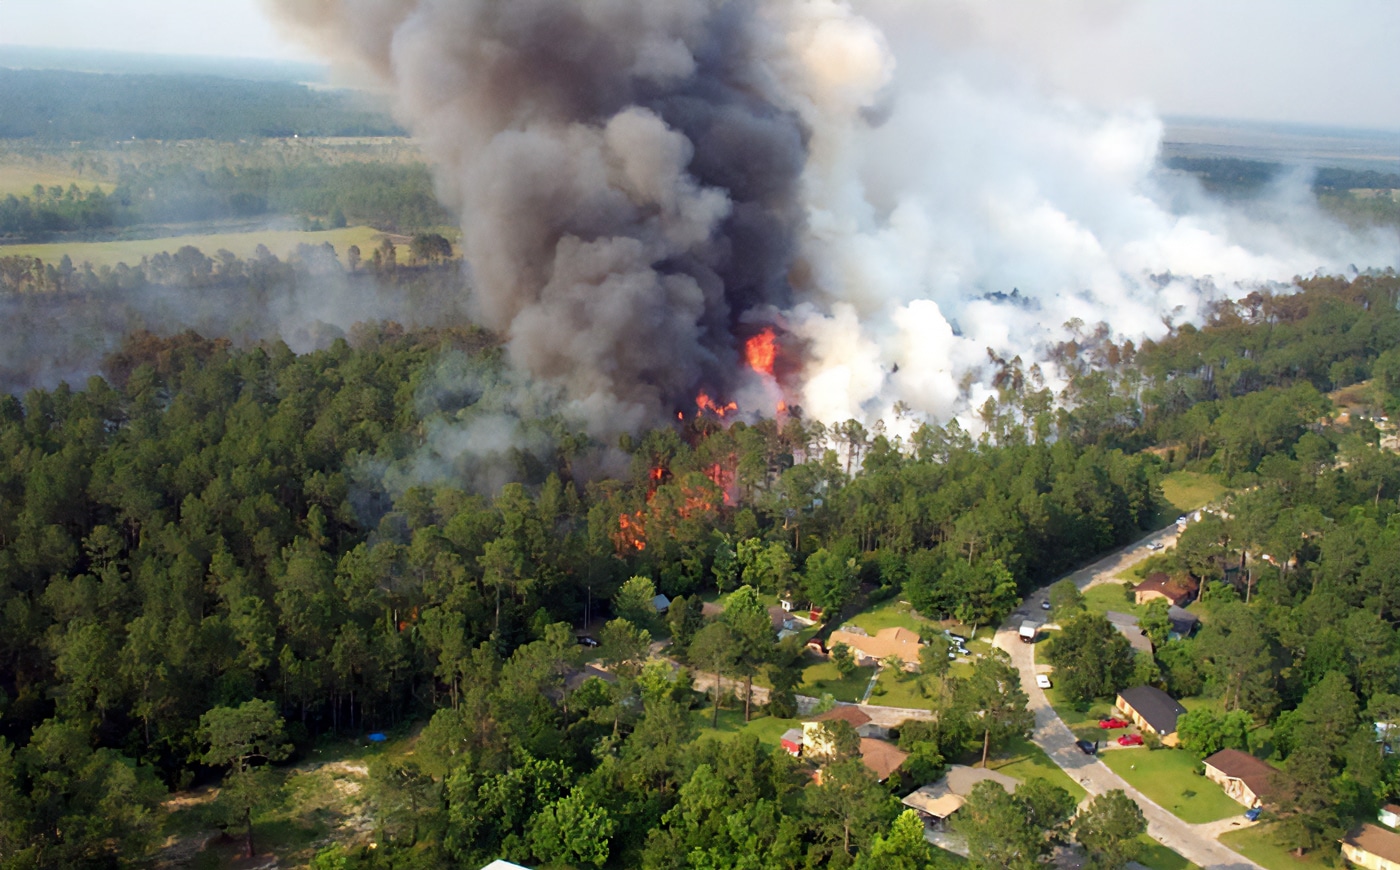 In this photograph we see a raging forest fire and smoke approaching a subdivision in a suburban community.